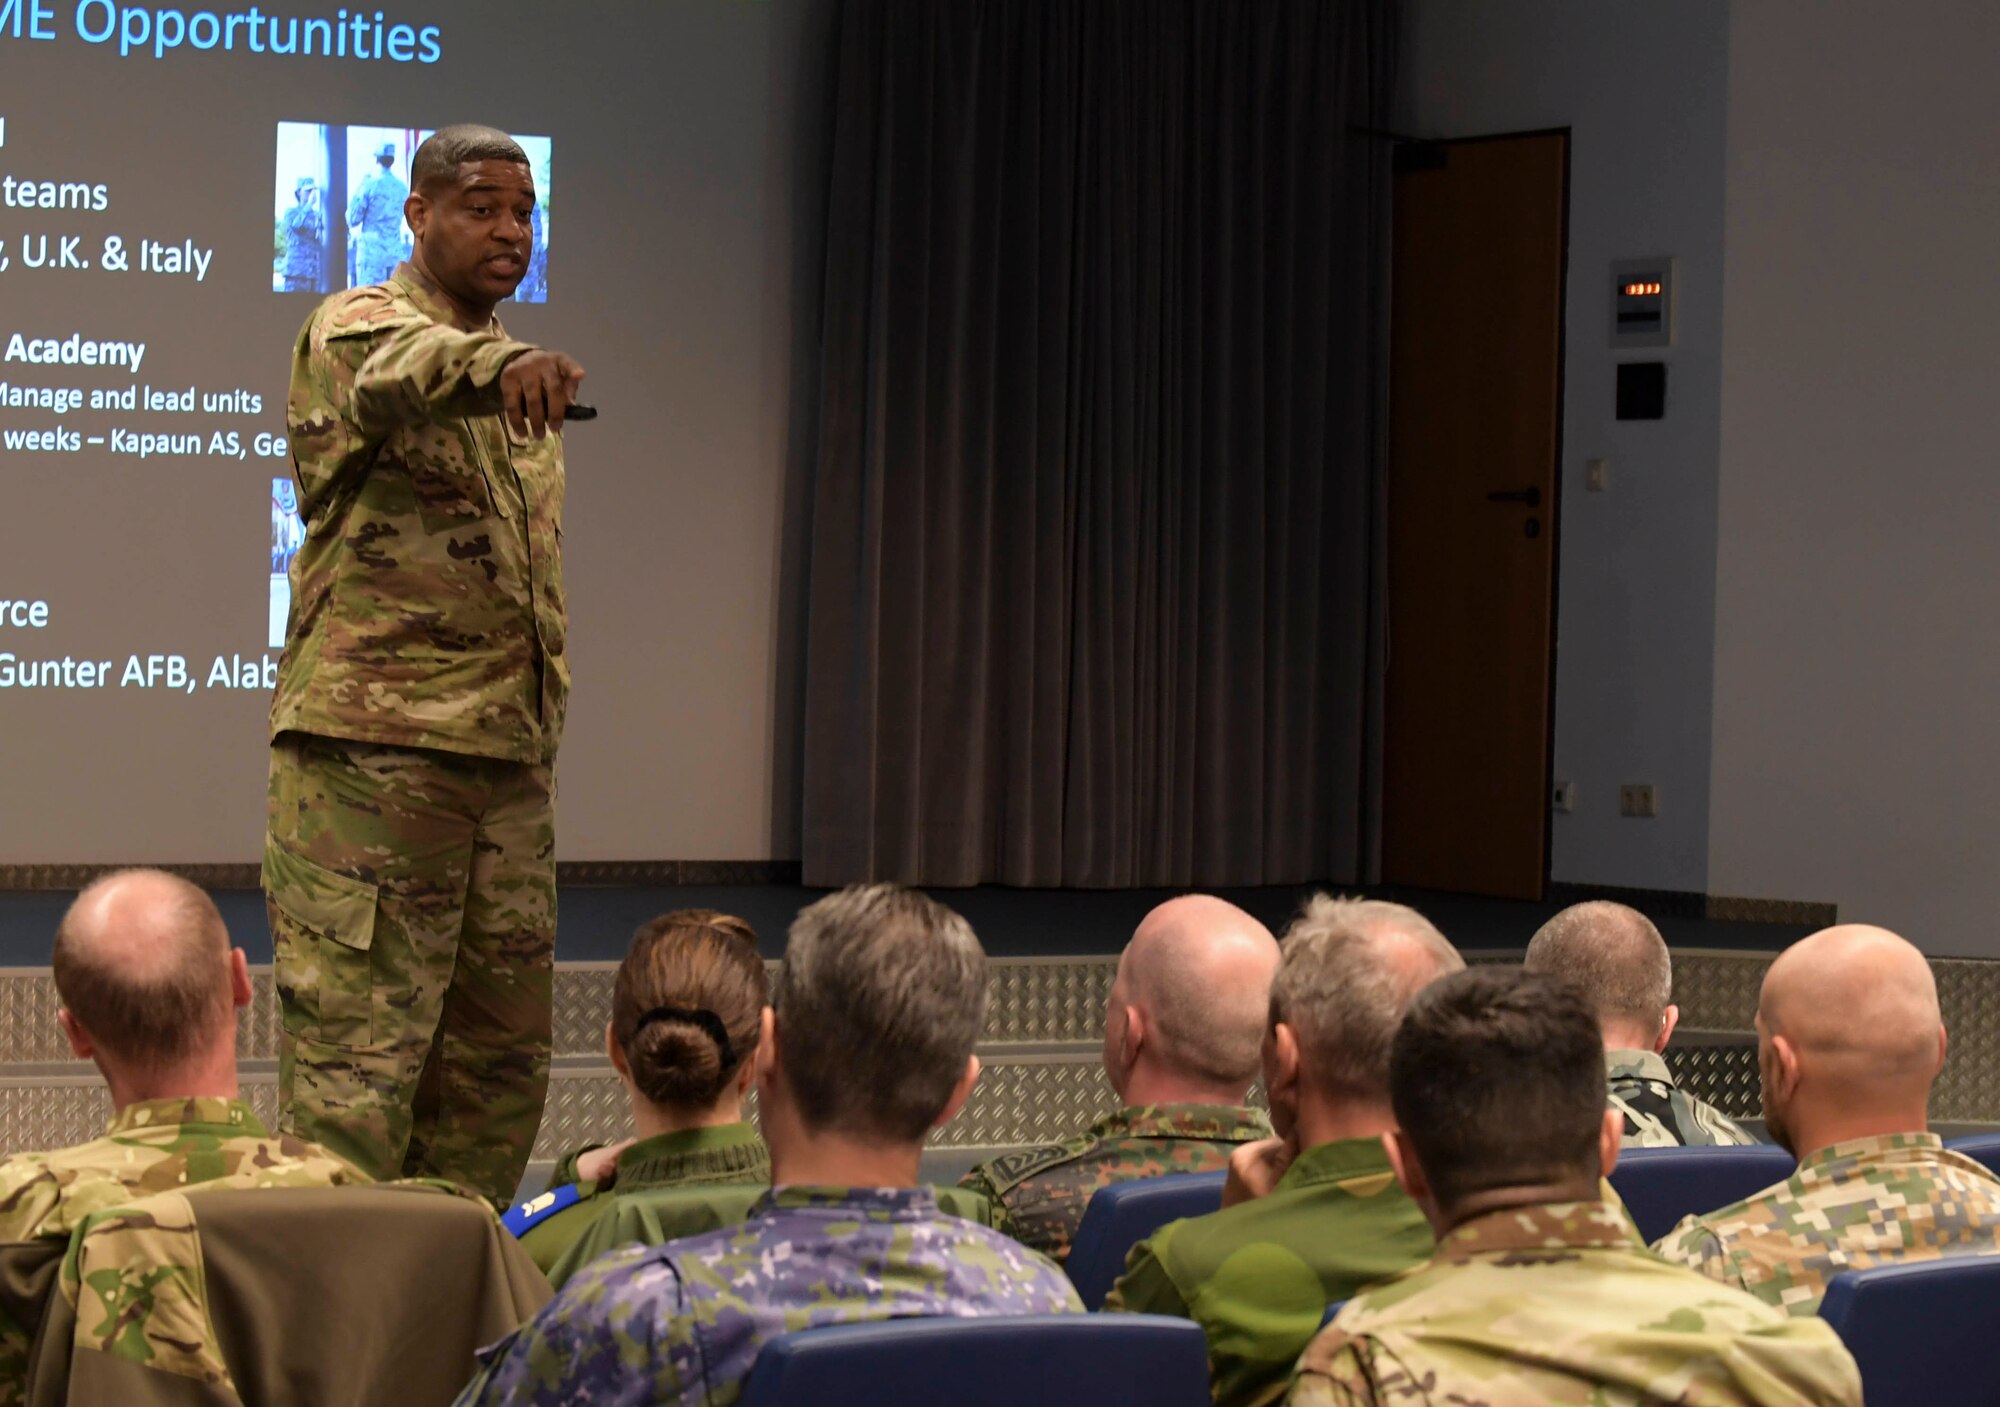 Chief Master Sgt. Phillip Easton, U.S. Air Forces Europe - Air Forces Africa command chief, gives a brief during the first European Air Forces Senior Enlisted Conference at Kisling NCO Academy, at Kapaun Air Station, Germany, May 21, 2019. Participants from 19 countries, including the United States, discussed multiple topics to help enhance personal growth, increase interoperability, and build partnership capacity. (U.S. Navy photo by Mass Communication Specialist 2nd Class Deanna C. Gonzales)